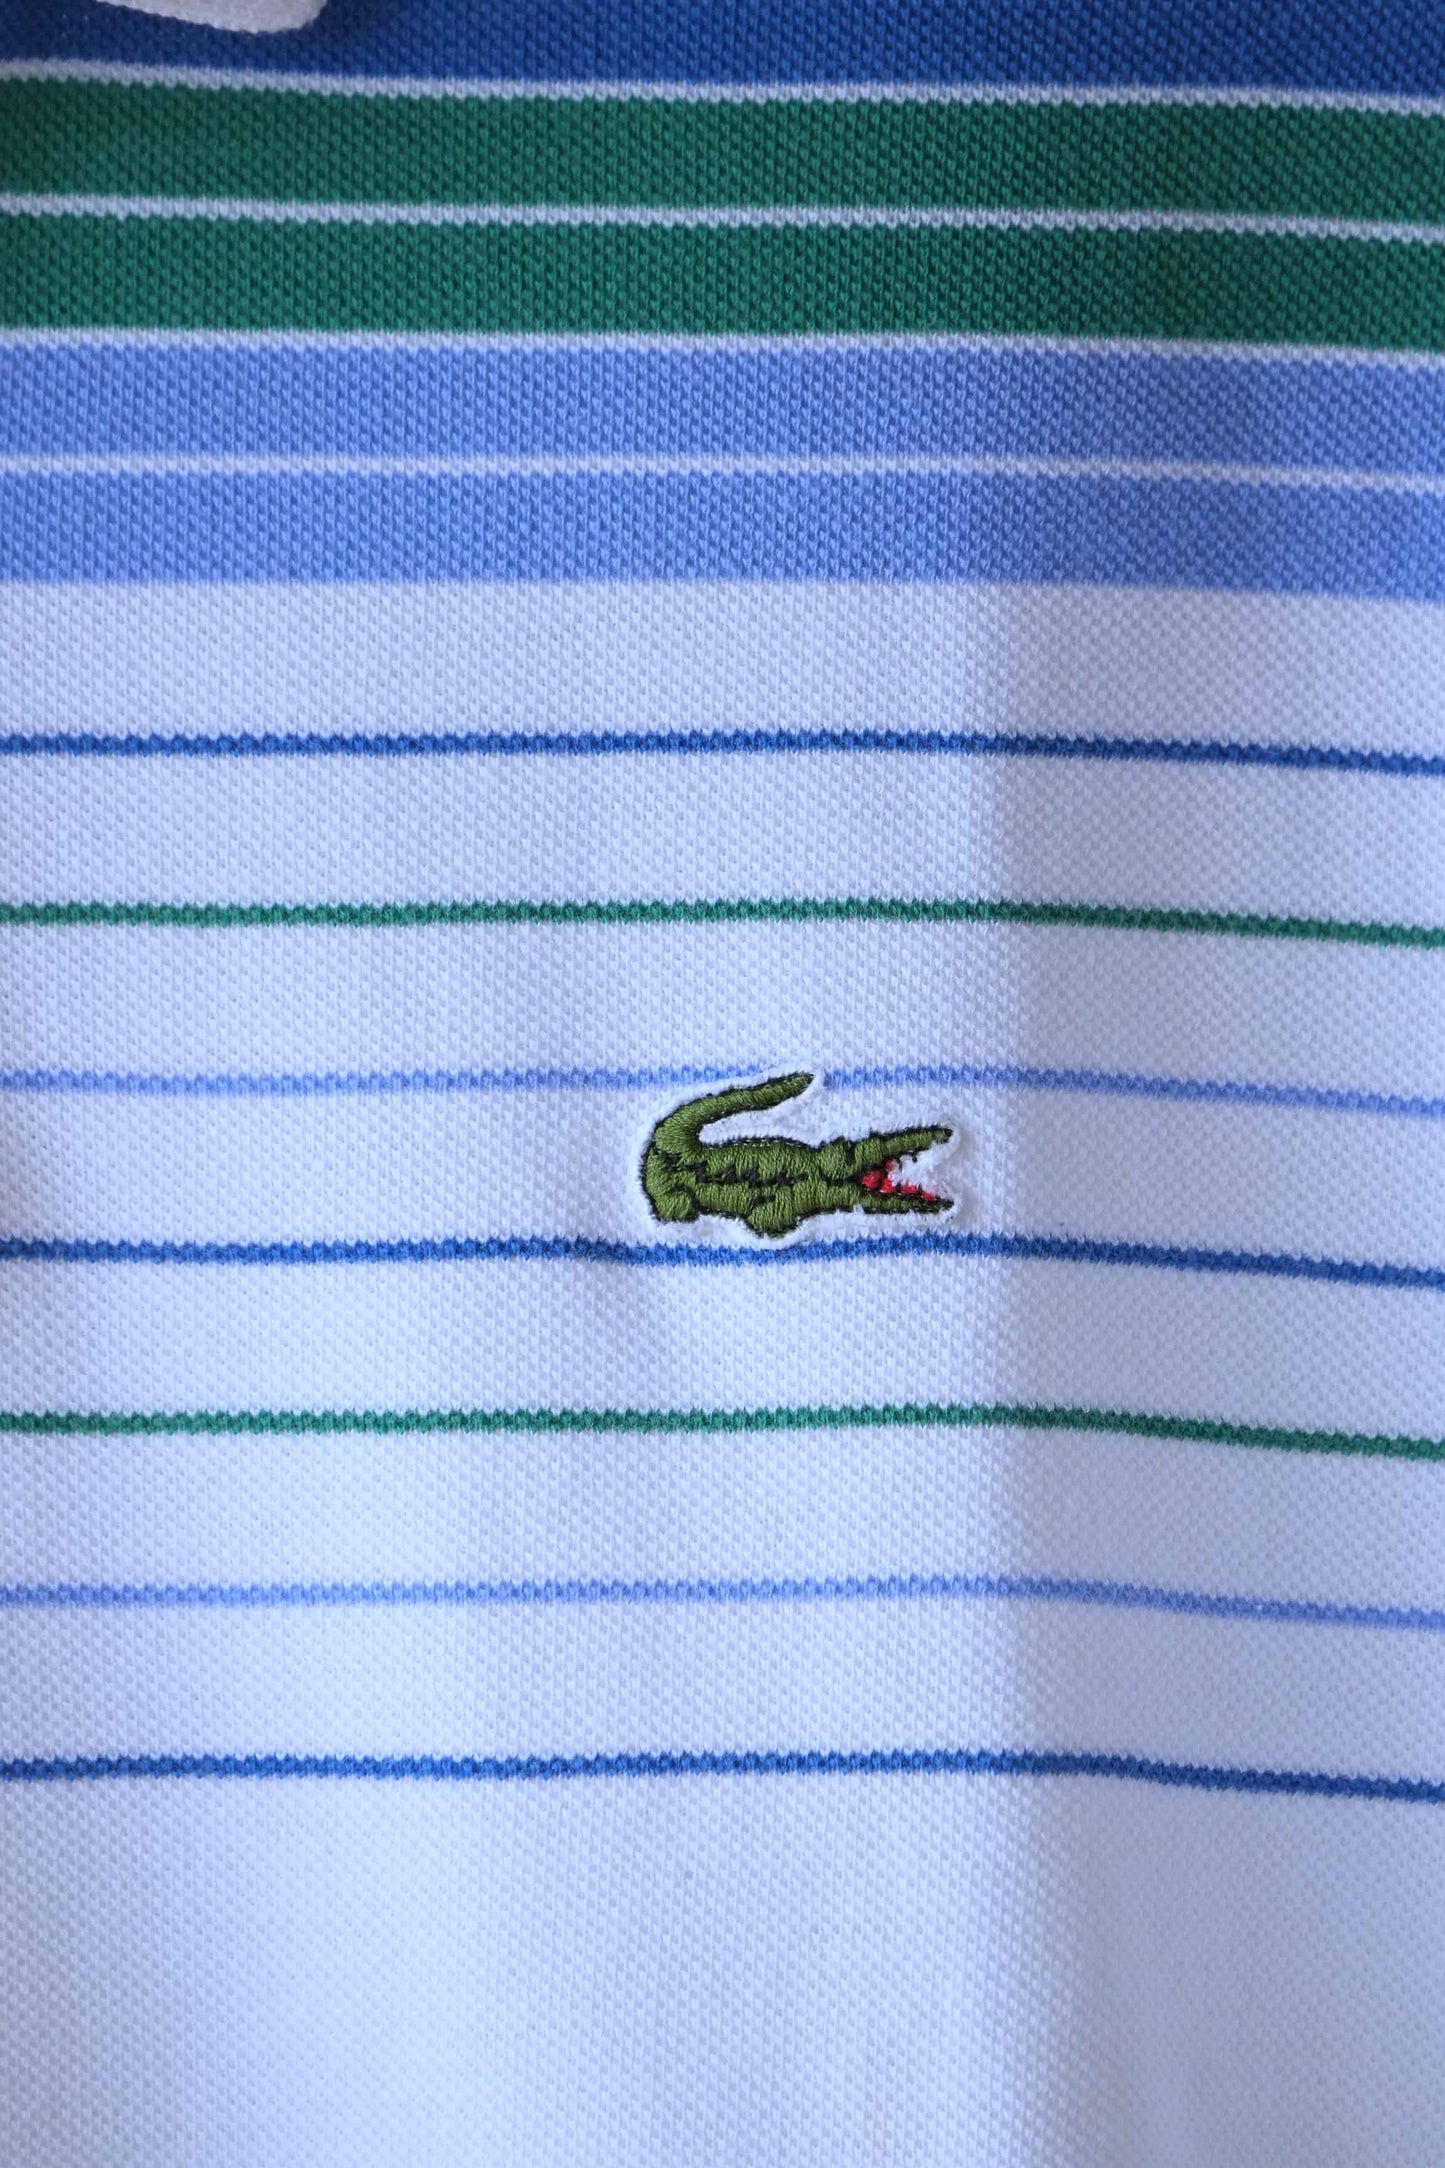 Close up of Lacoste crocodile logo on LACOSTE Vintage Striped Polo in white with green and blue stripes